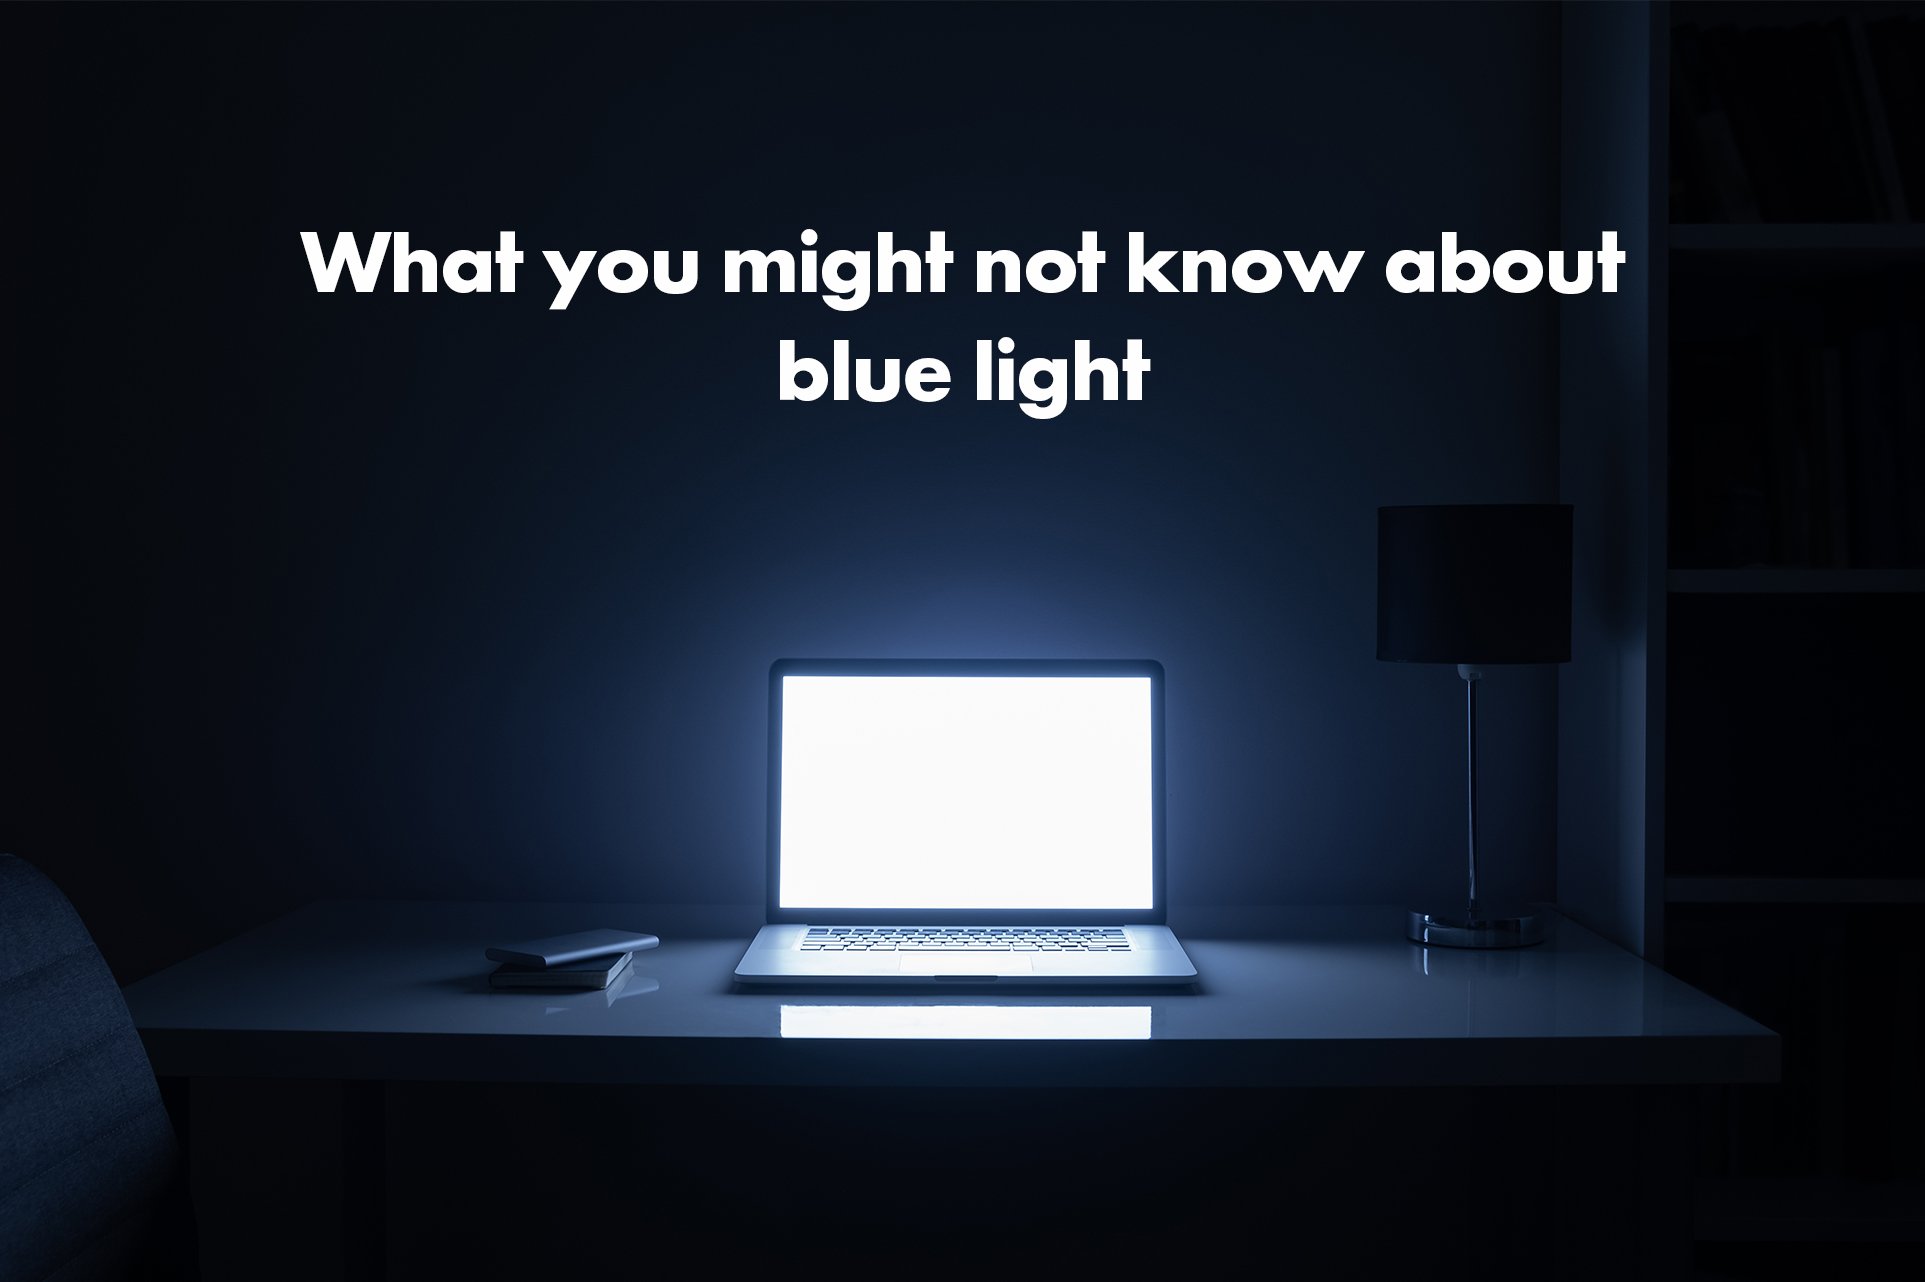 What you might not know about blue light